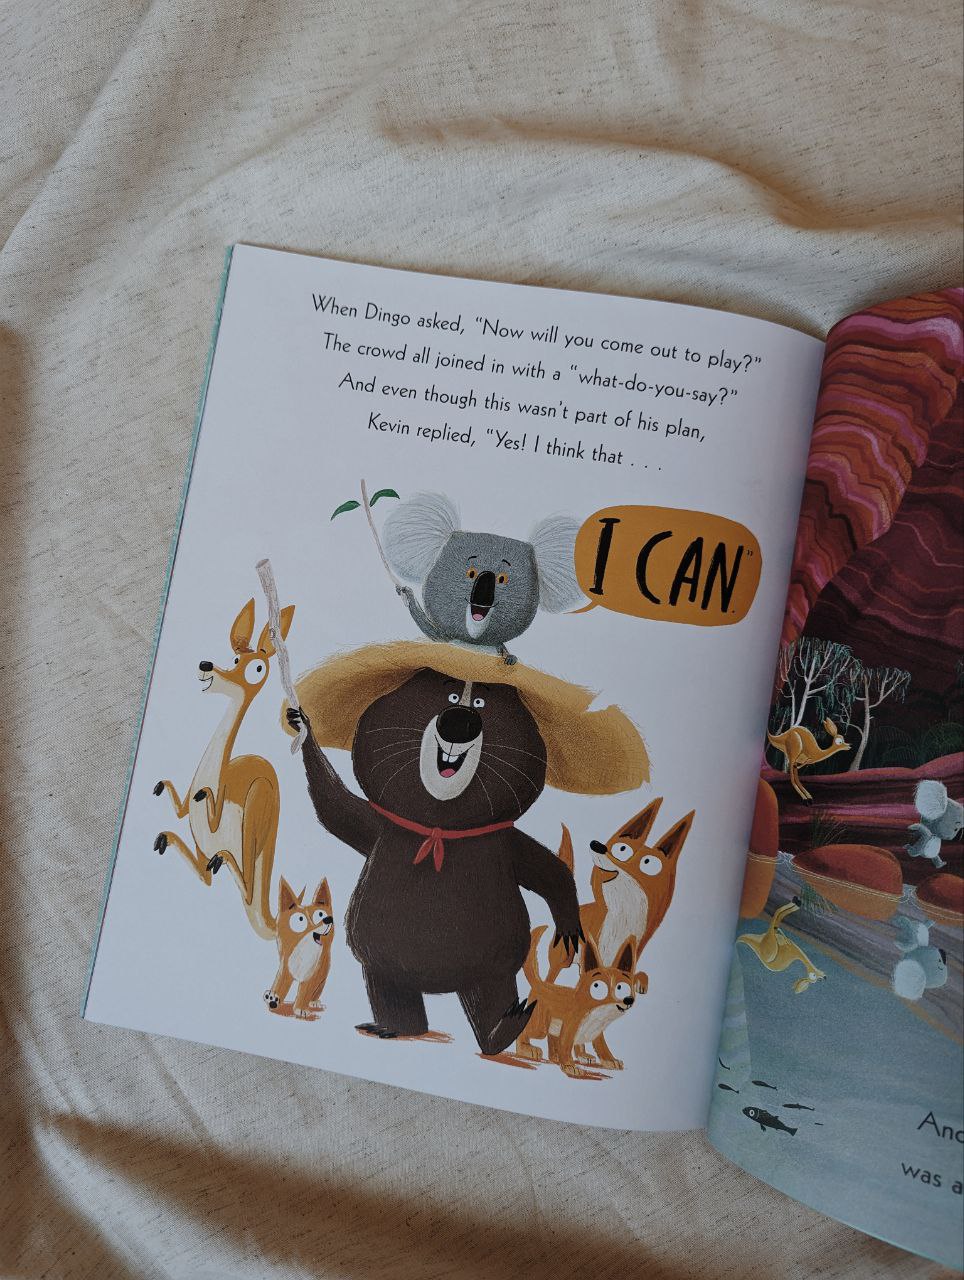 The Koala Who Could by Rachel Bright